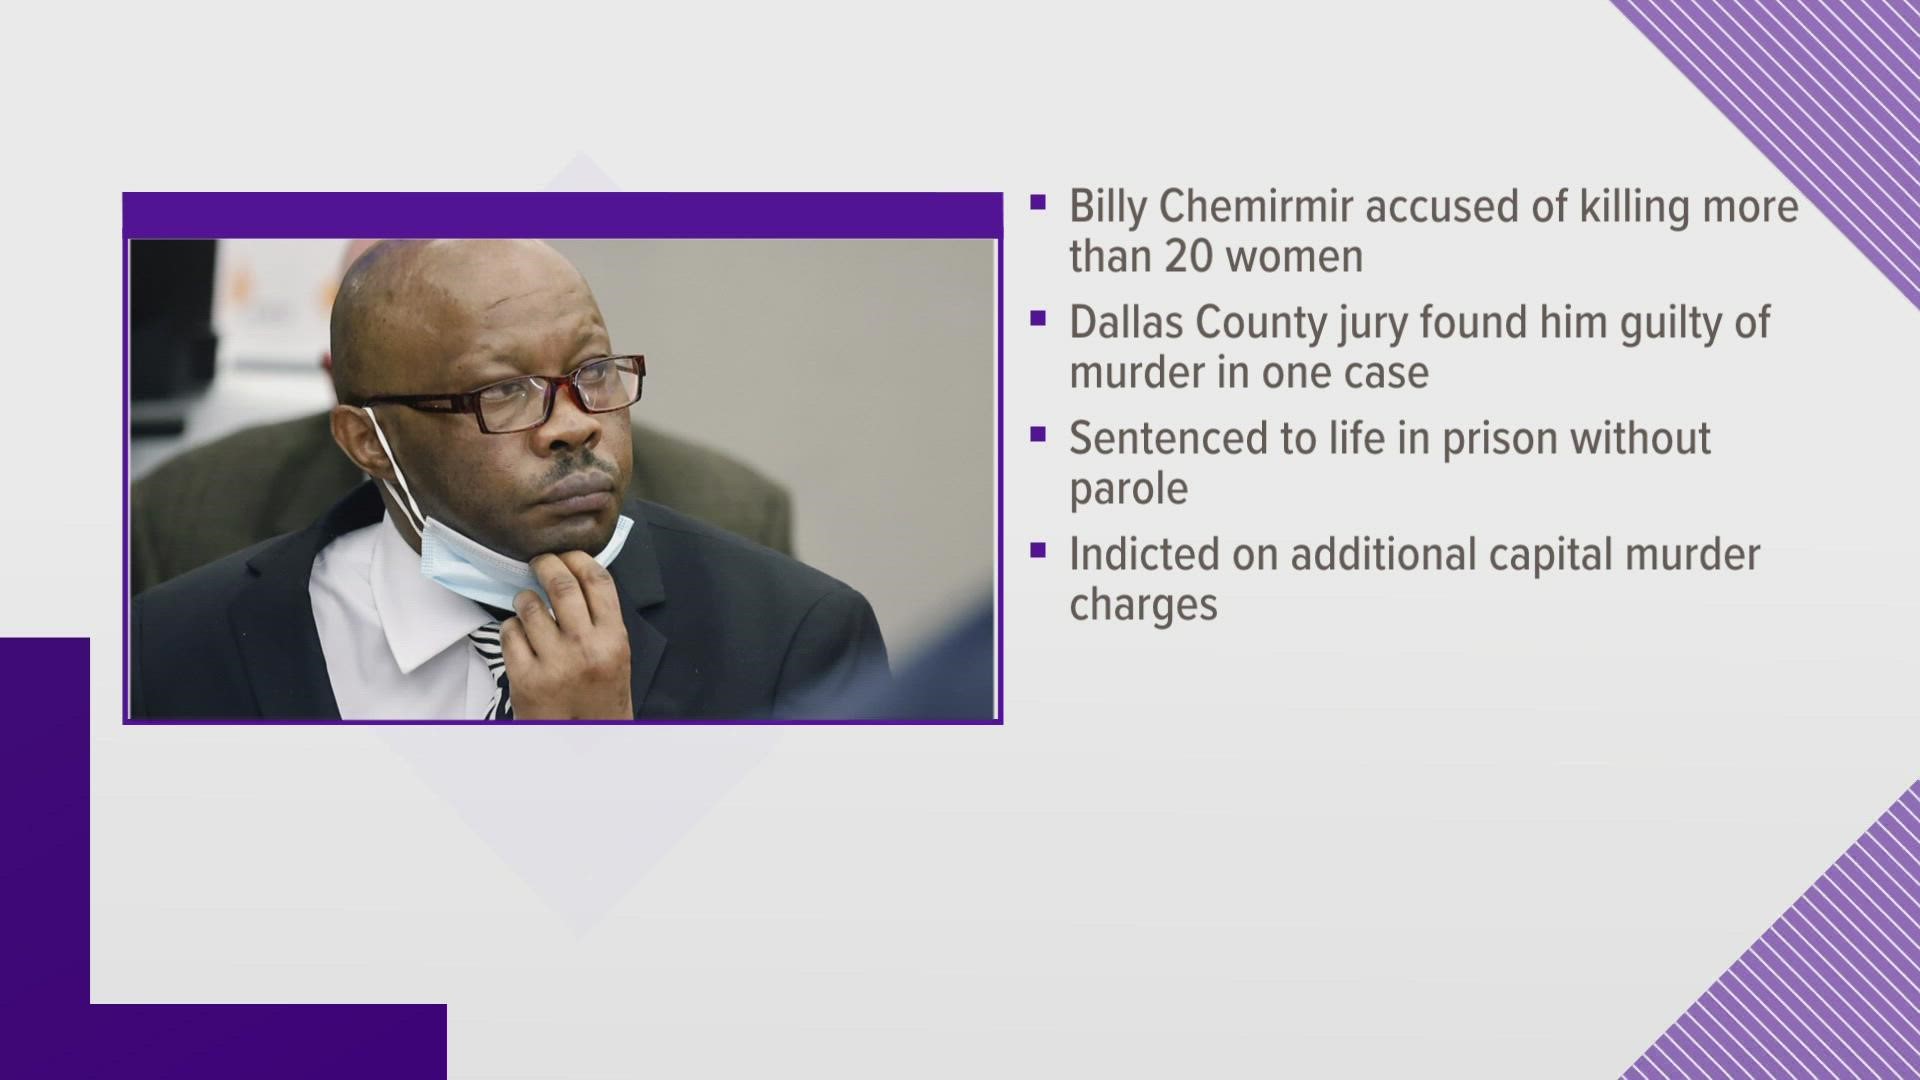 Billy Chemirmir has been charged with killing 22 women in the Dallas area.